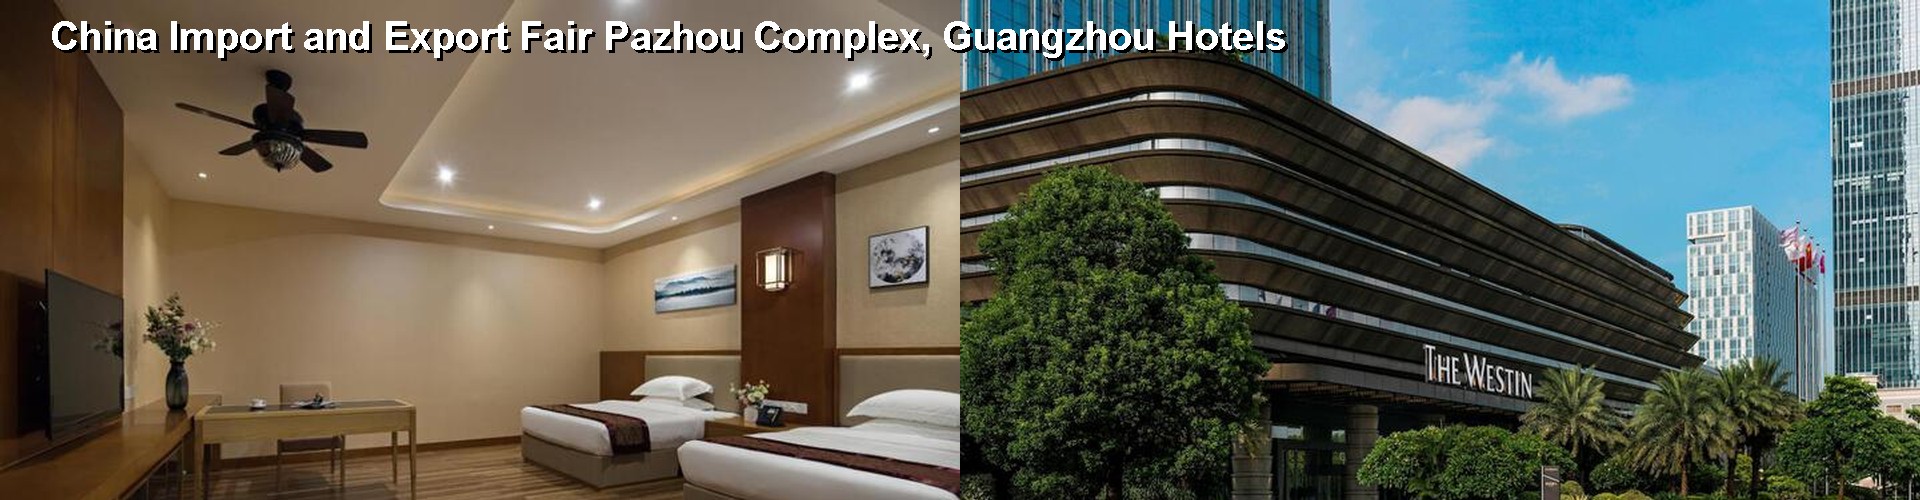 Finest Hotels Near China Import And Export Fair Pazhou - 